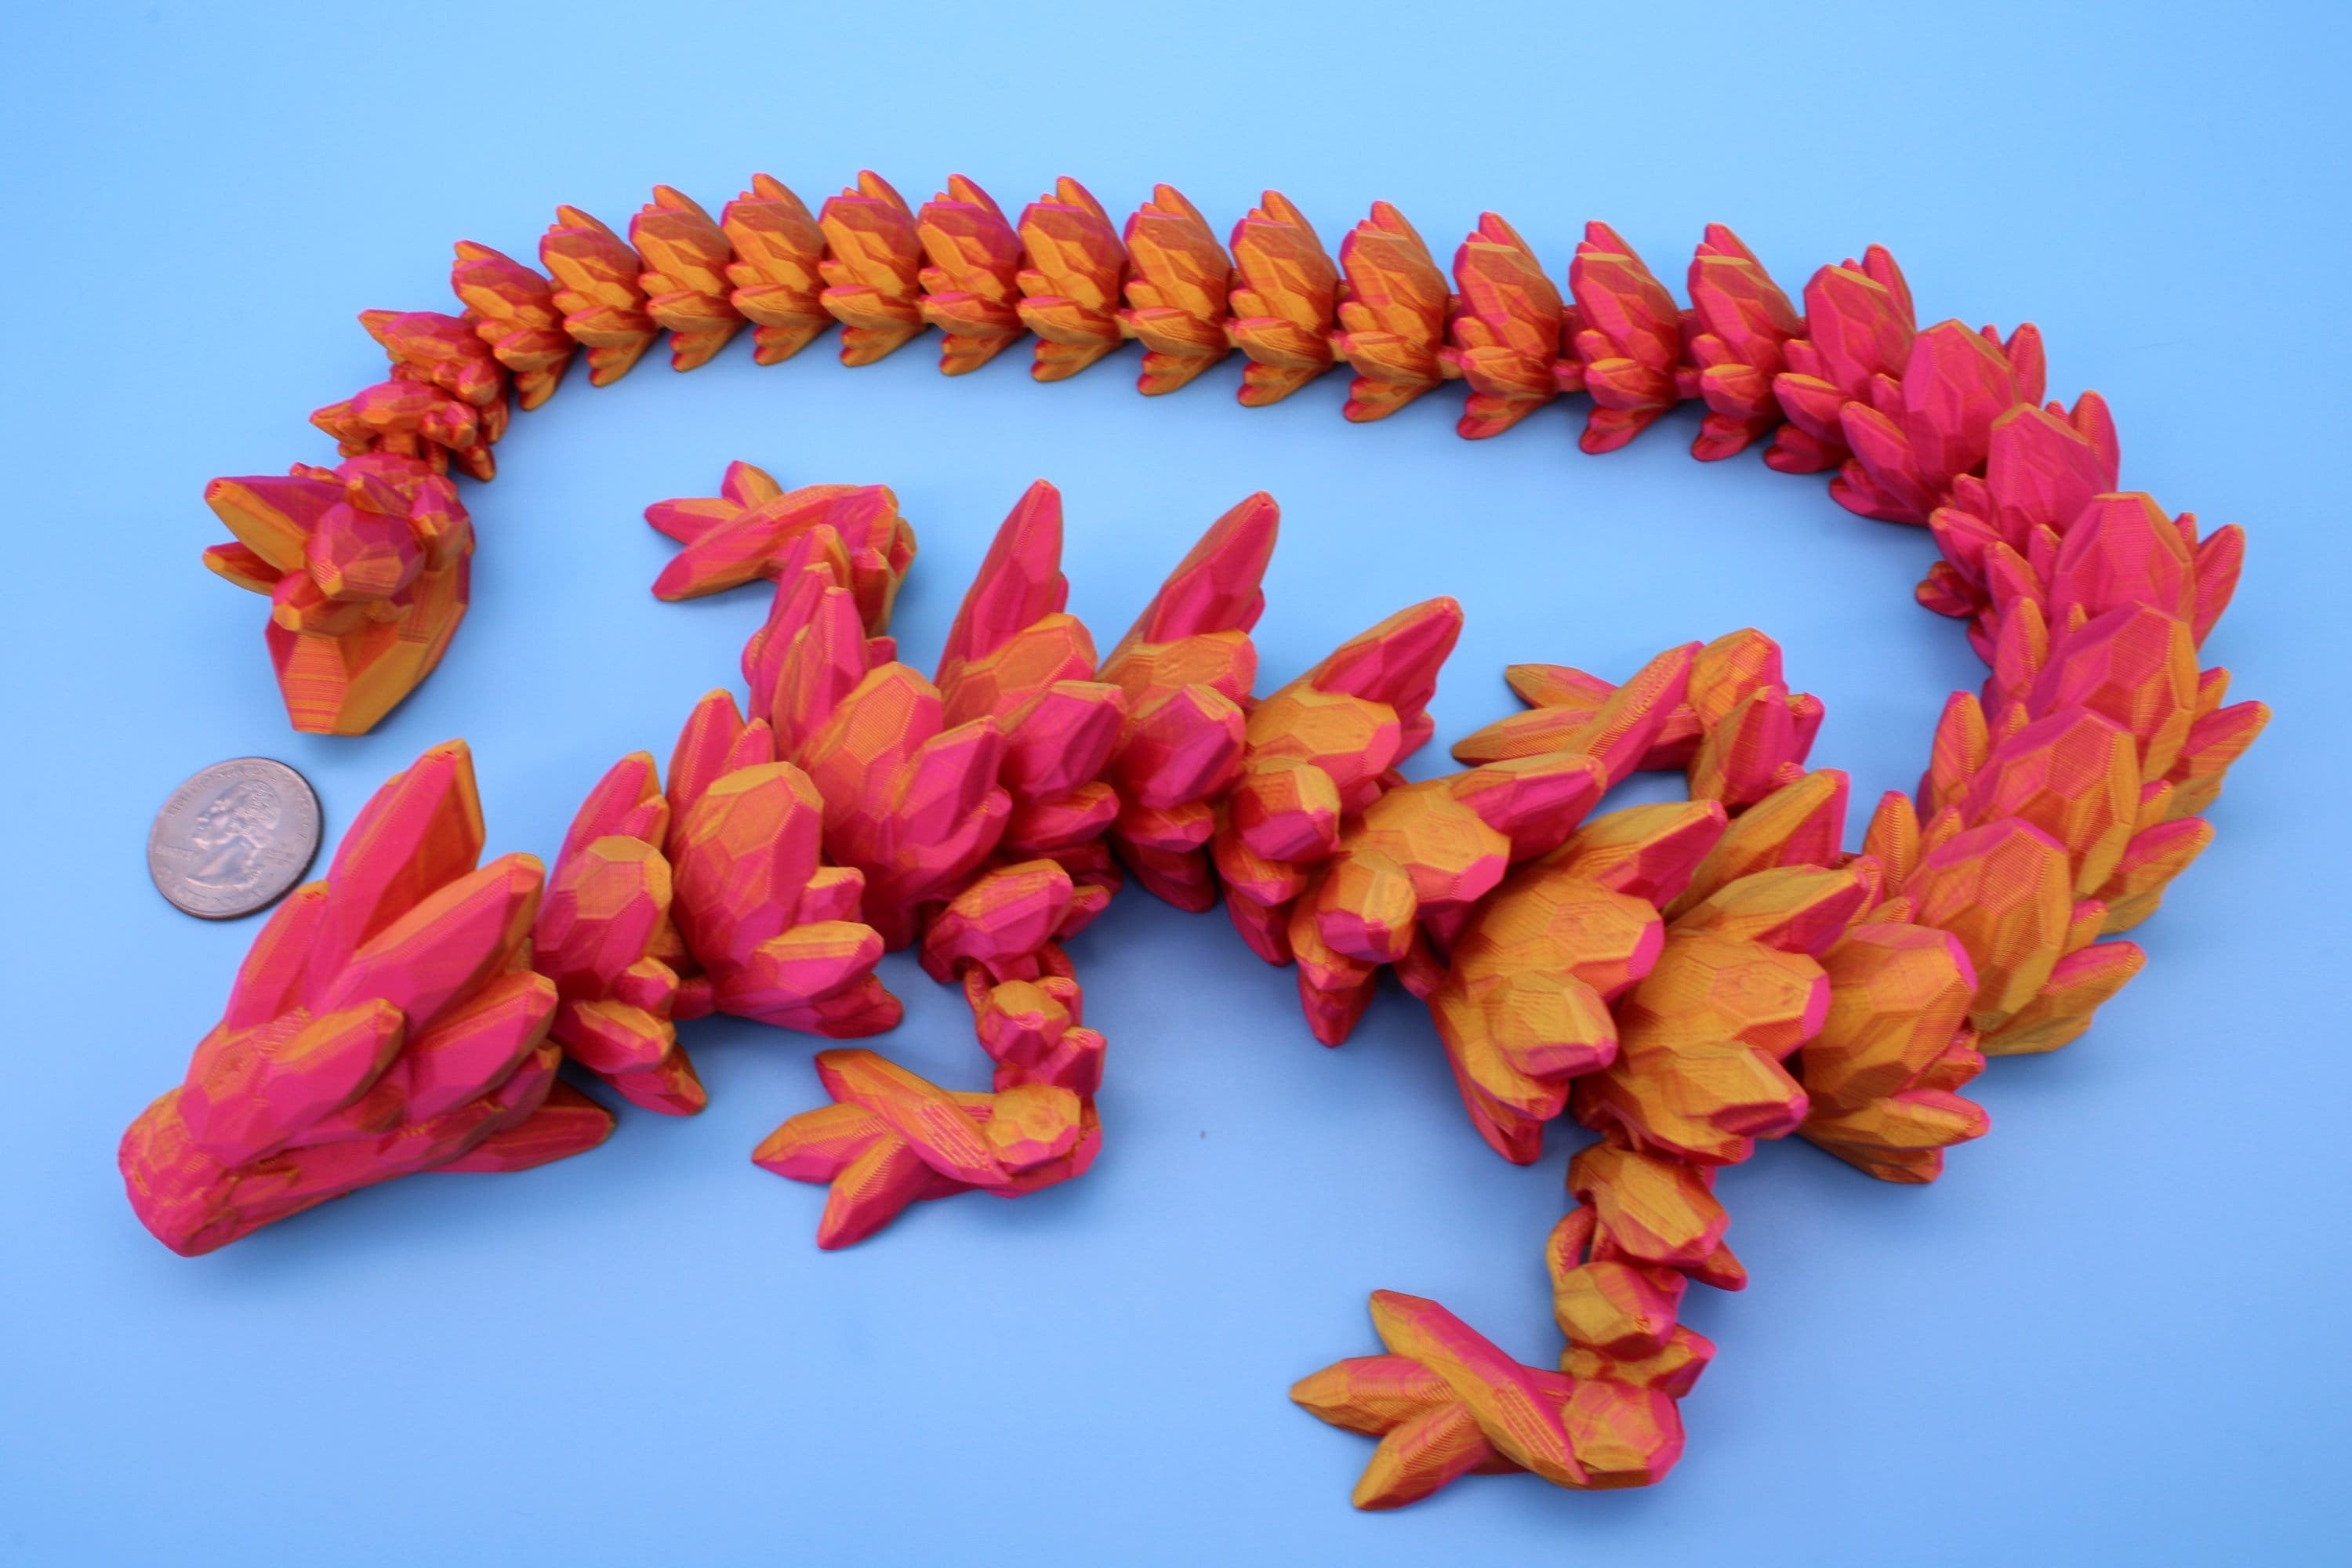 Gem Dragon | Multi Color | 3D Printed Articulating Dragon | Flexi Toy | Adult Fidget Toy | Dragon Buddy ready for you | 26 inches!